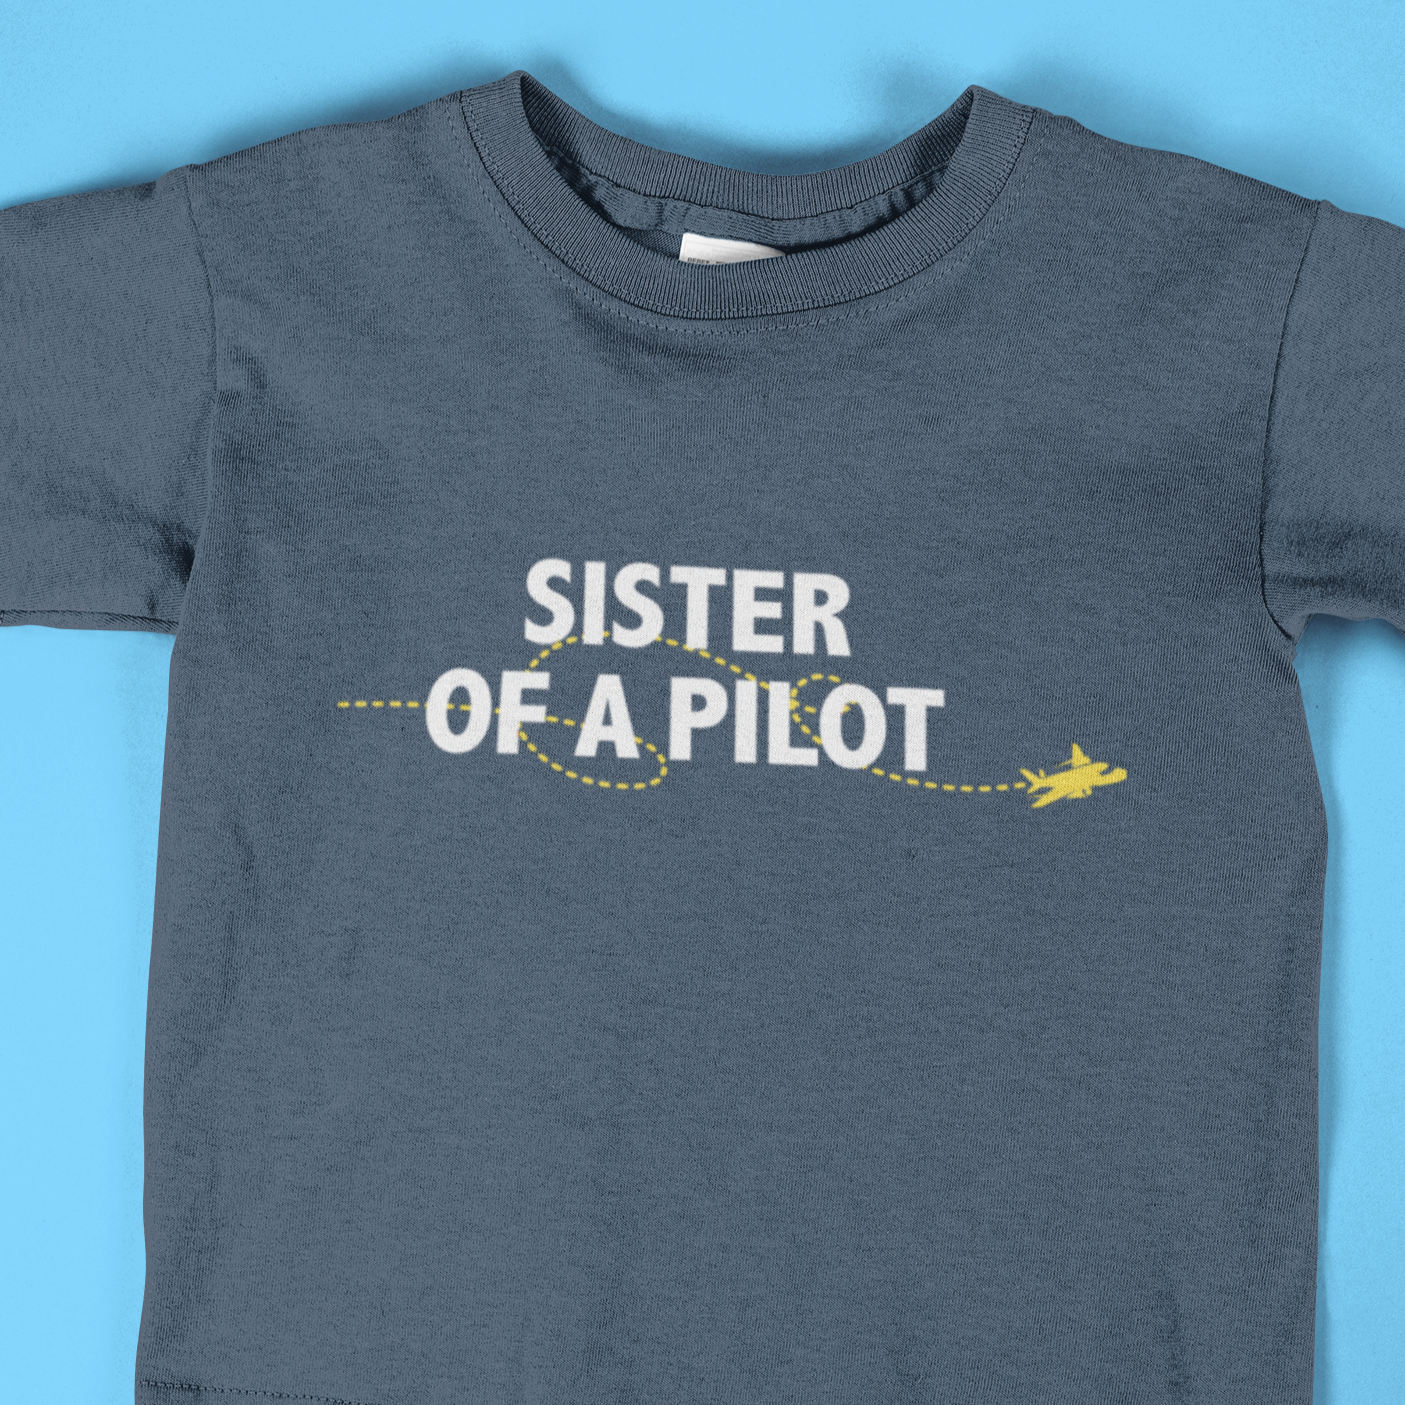 Sister of the/a Pilot - Baby & Toddler T-shirts